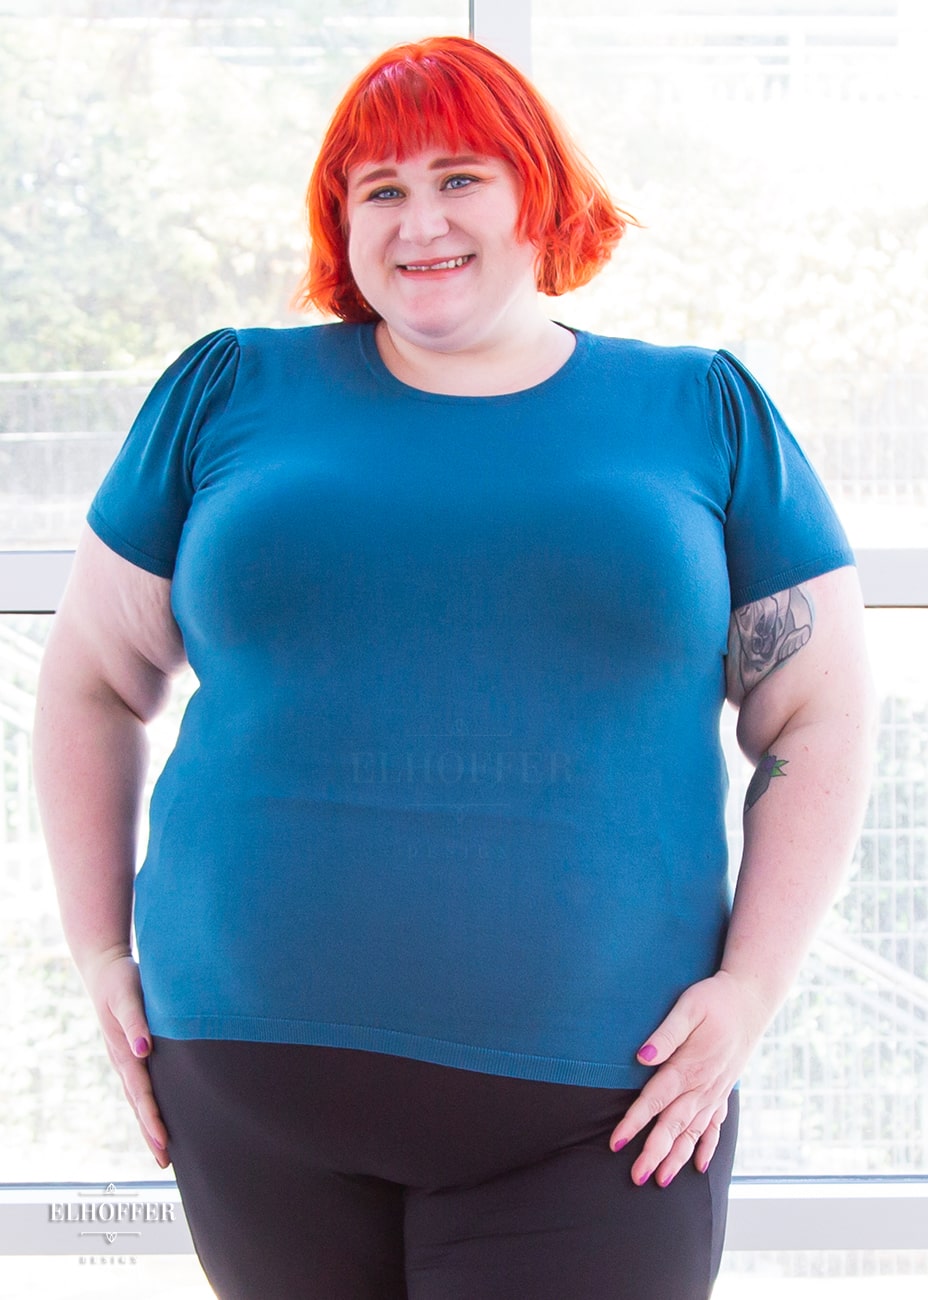 Logan, a fair skinned 3xl model with short orange hair with bangs, is smiling while wearing a short sleeve light weight peacock teal knit top. The top hits about mid hip in length and the sleeves have pleated gathering at the shoulders.